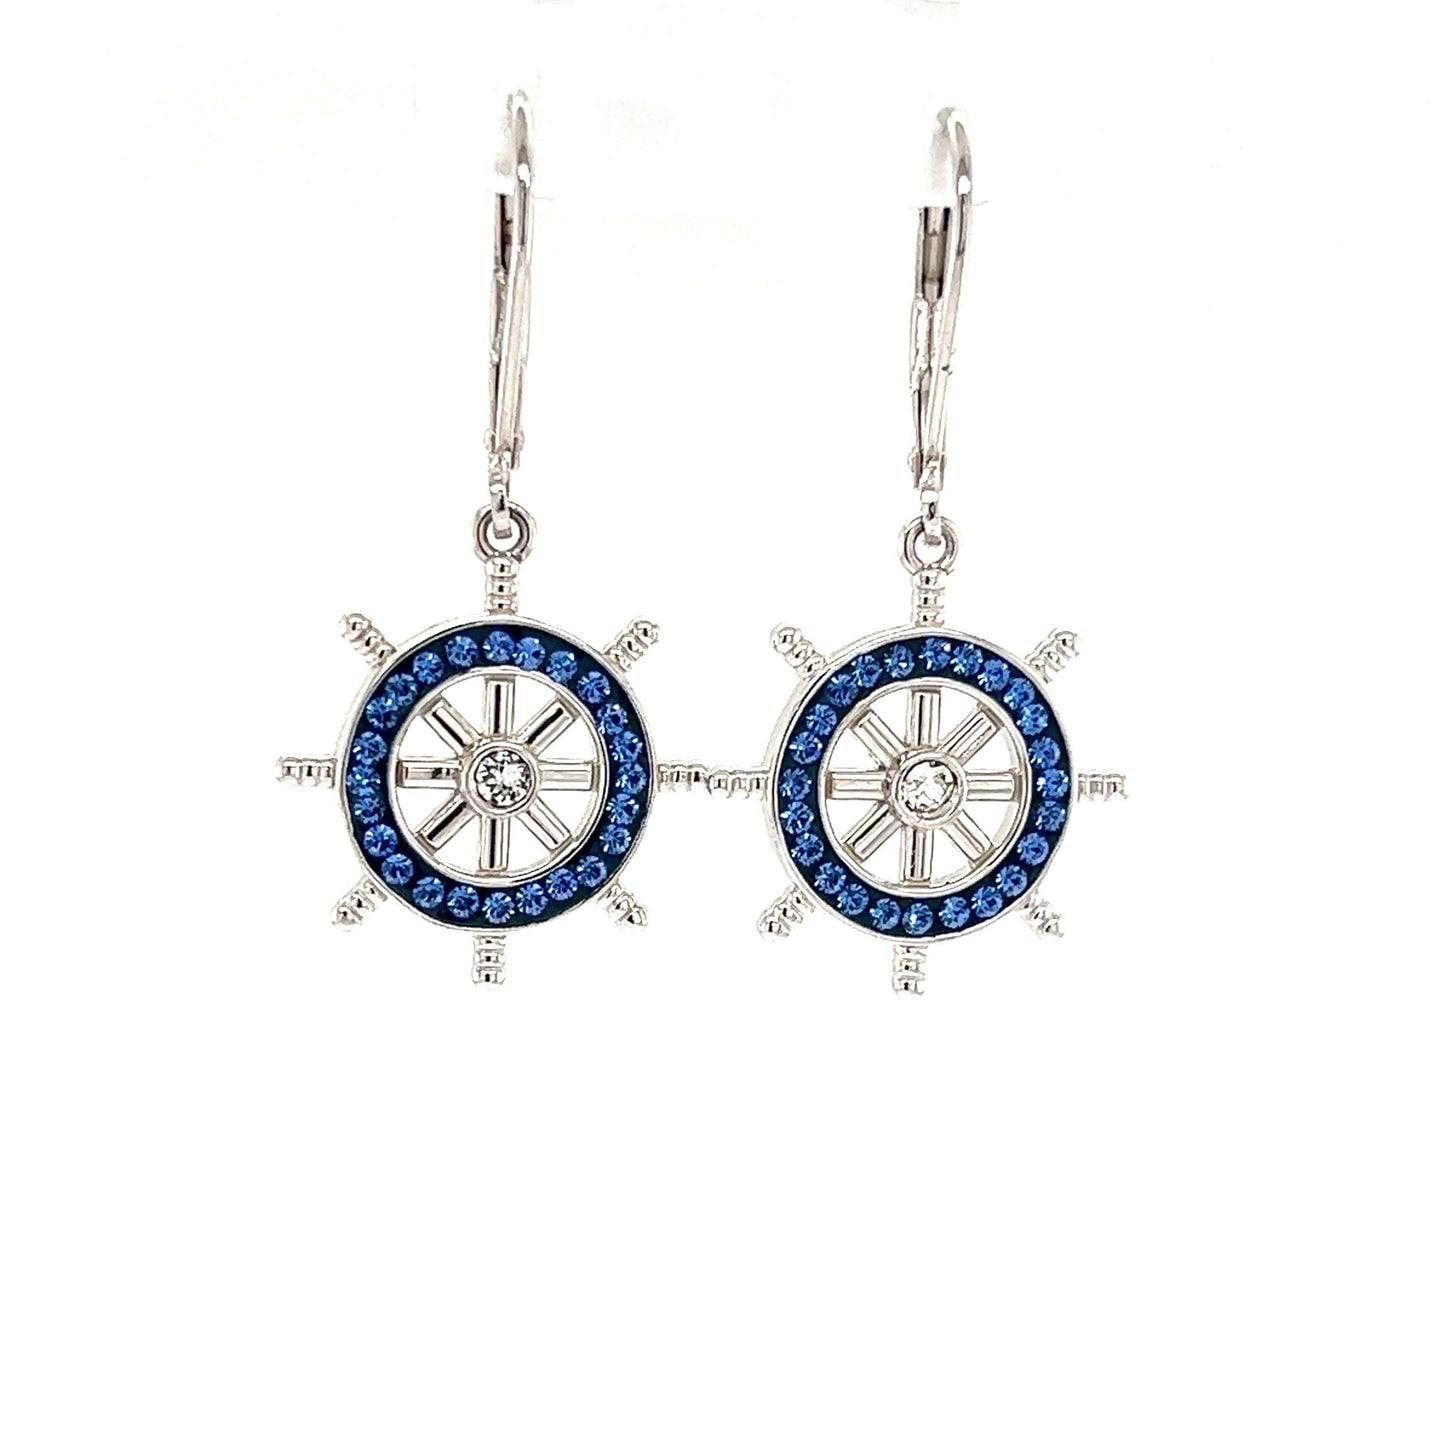 Ship's Wheel Dangle Earrings with Crystals in Sterling Silver Front View